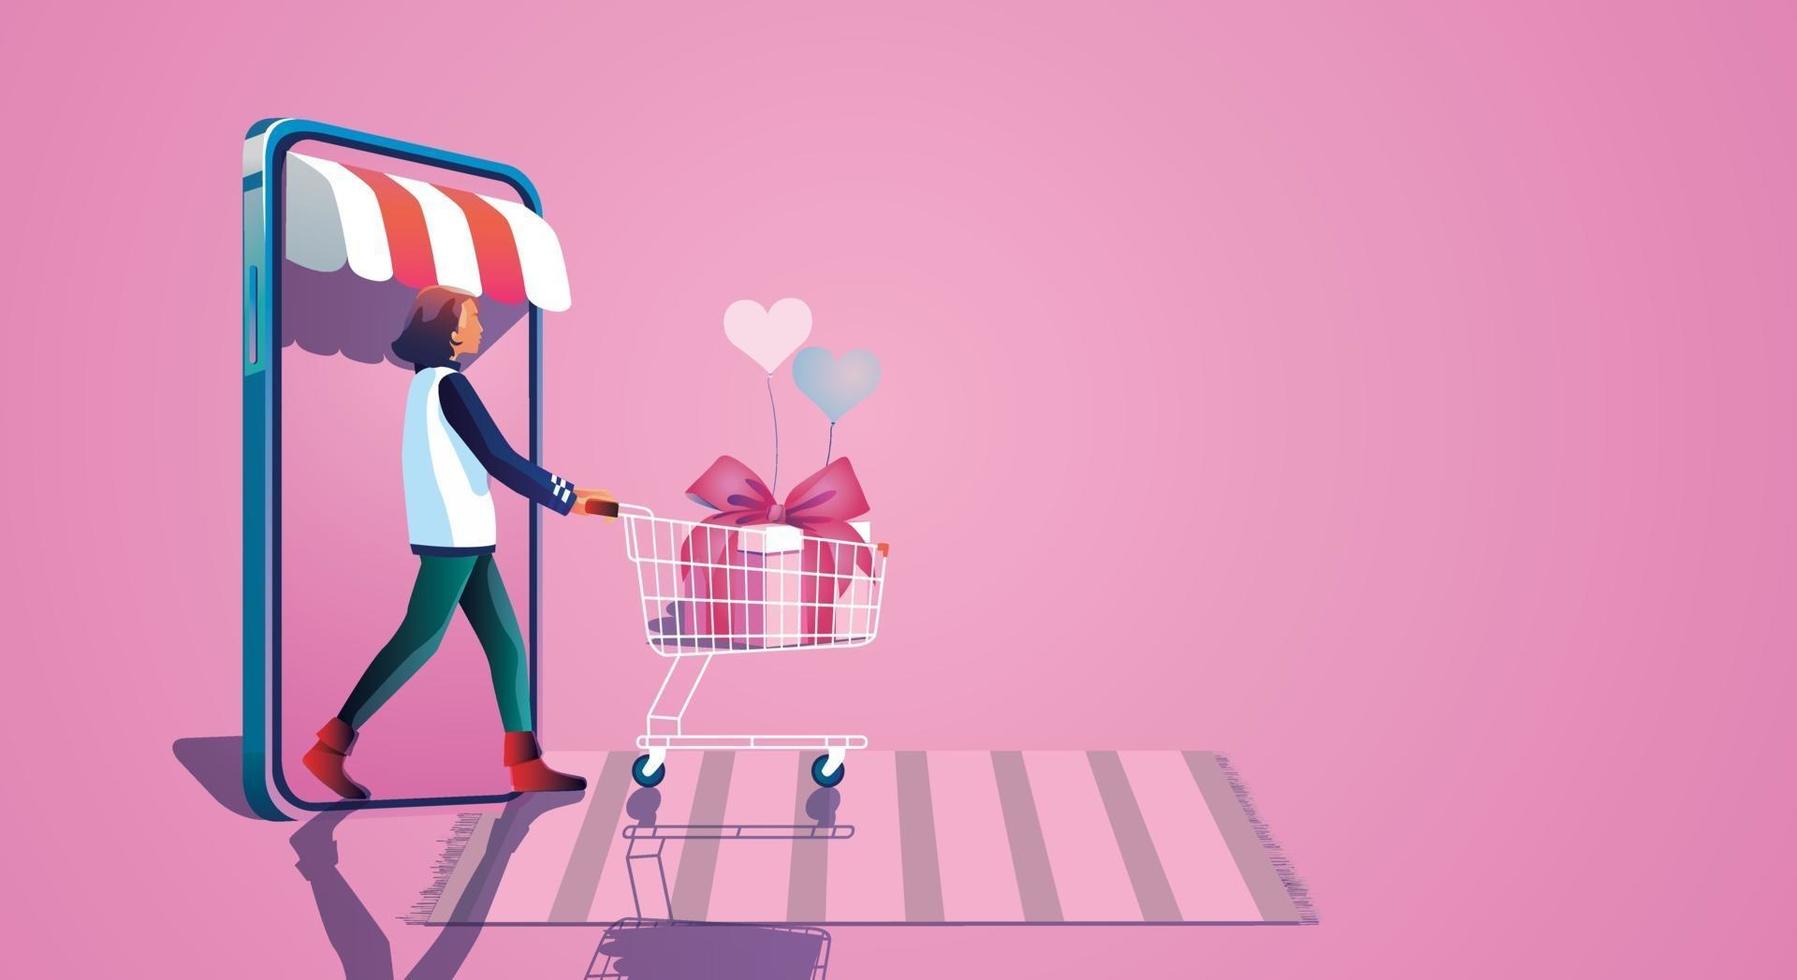 Young girl takes a shopping cart And enjoy online shopping through smartphones, Choose to buy gifts valentine's day concepts Website or Mobile phone Application, Flat design illustration vector